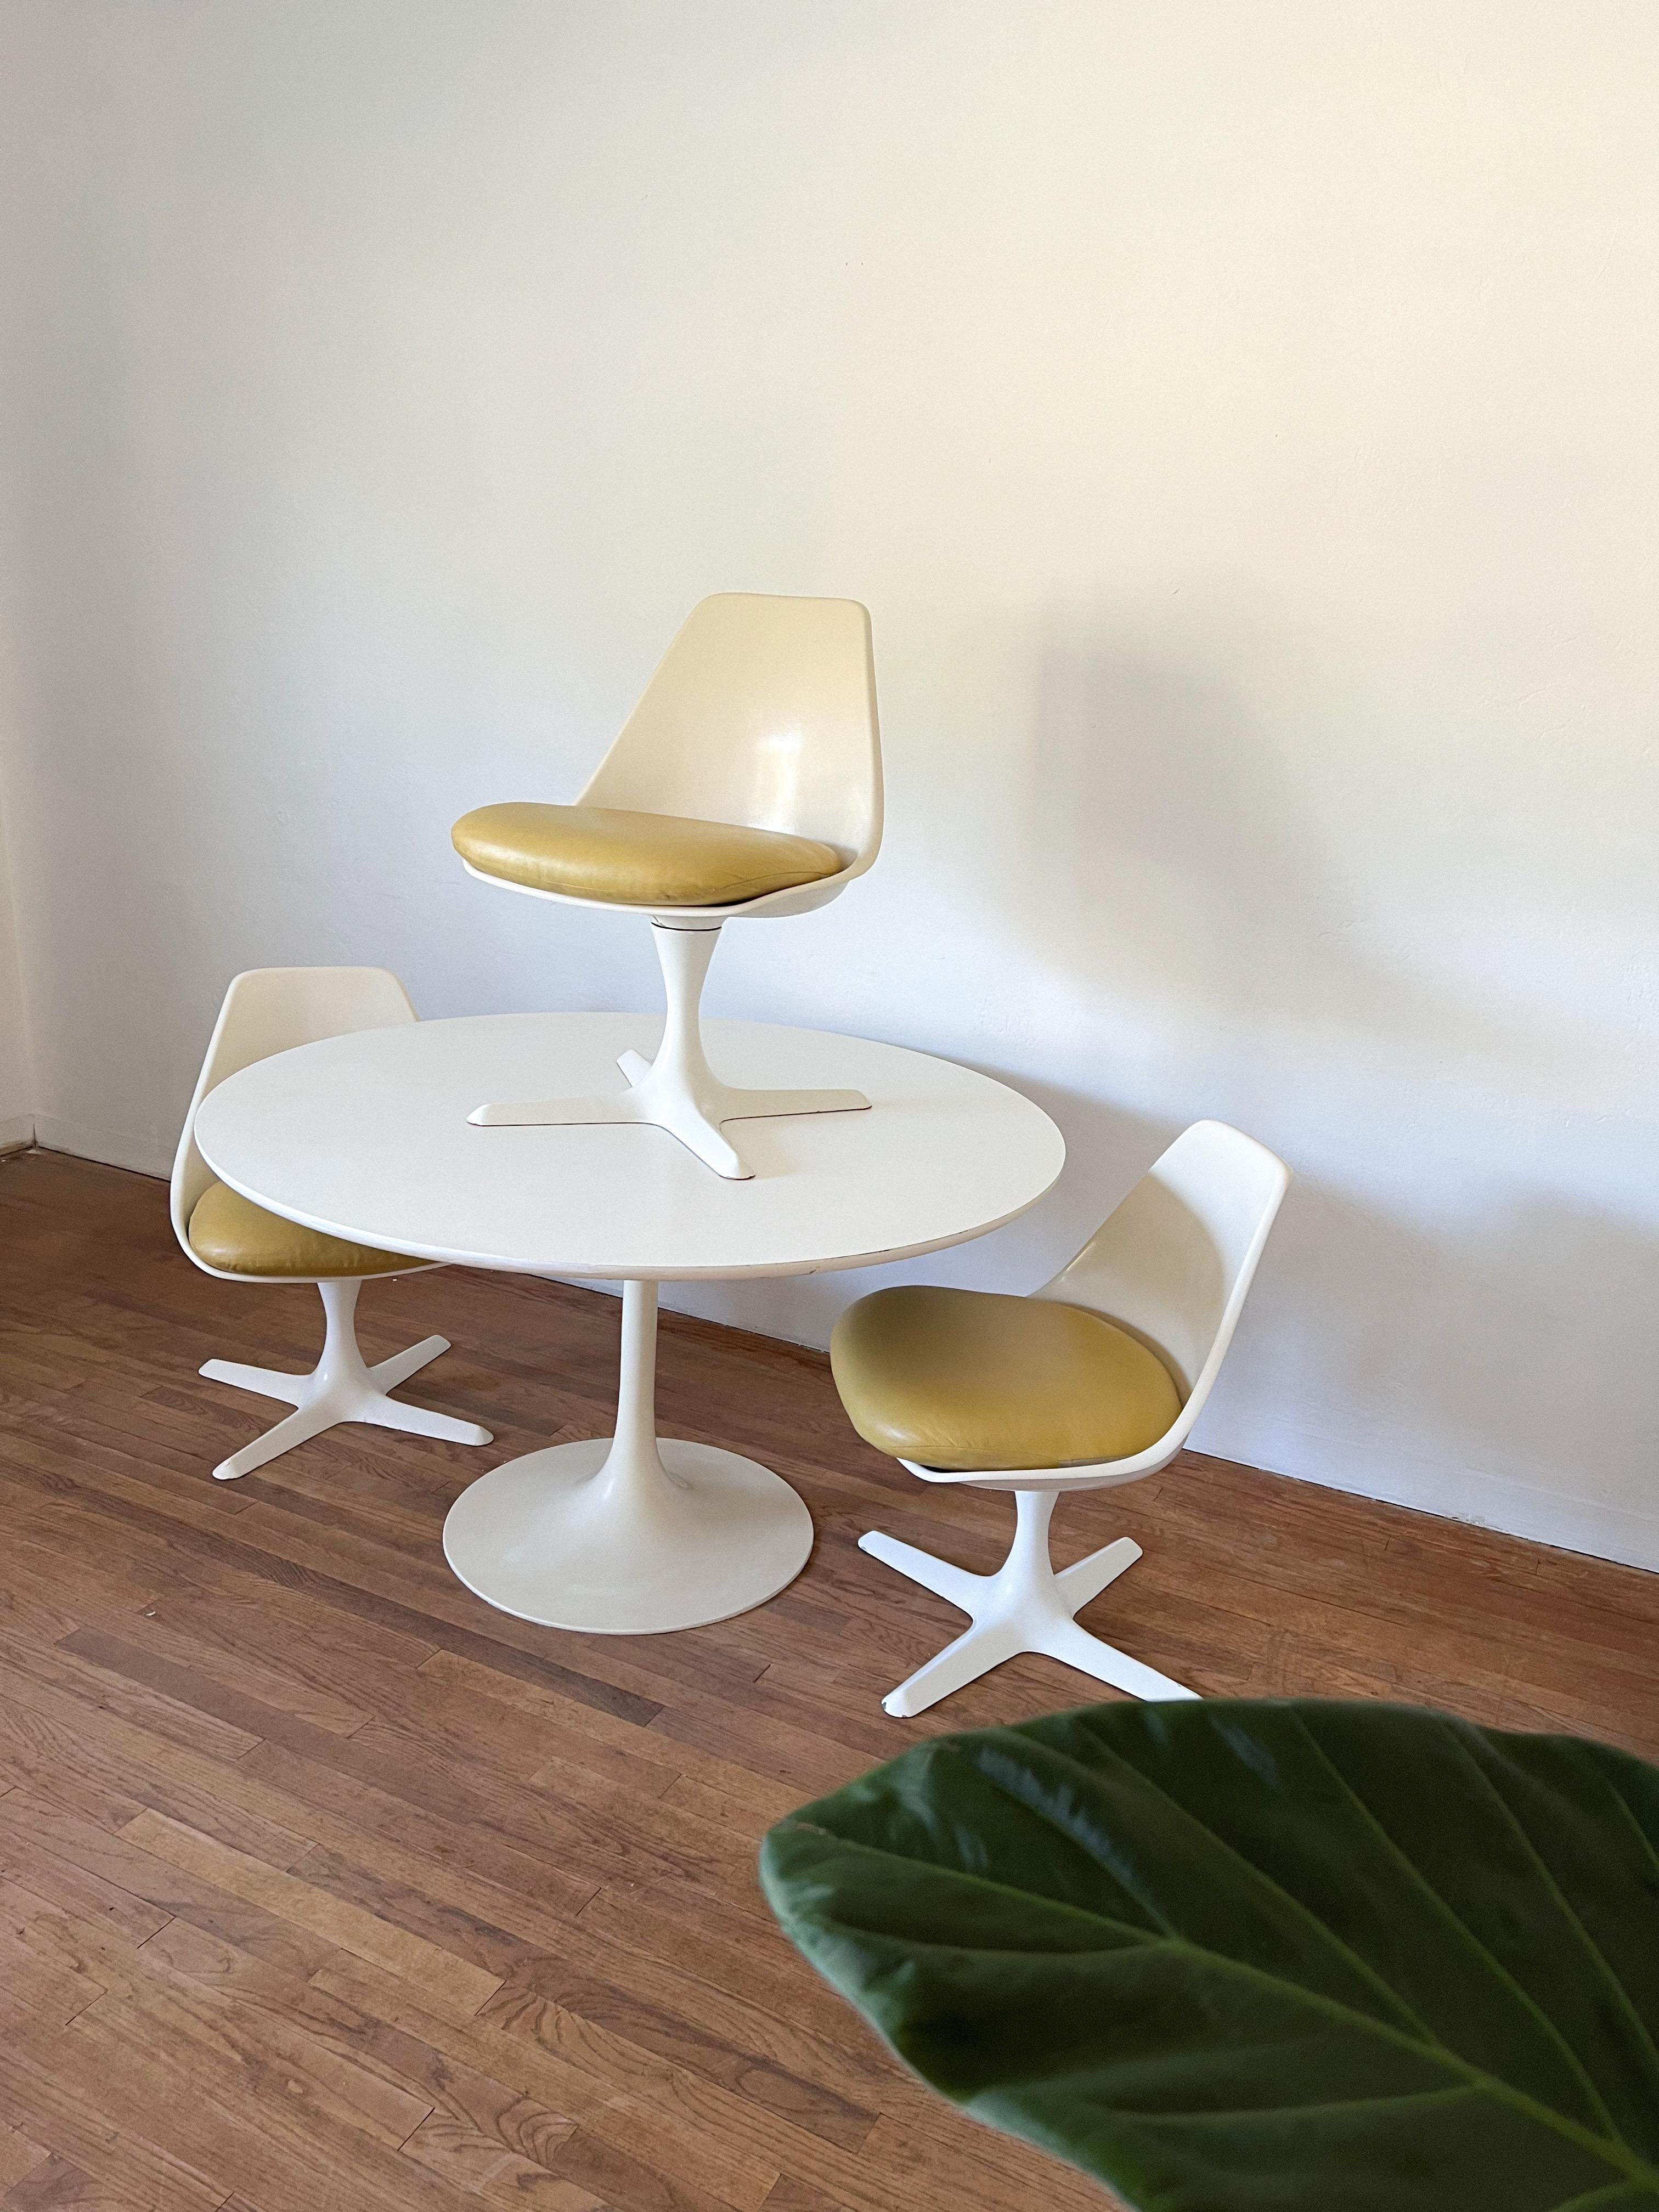 Space Age dining room by Maurice Burke for Arkana in Bath, England. It consists of a table with a tulip base and 3 matching chairs with propeller style base. This is an iconic design from the early 1960s. All four chairs rotate and return to the